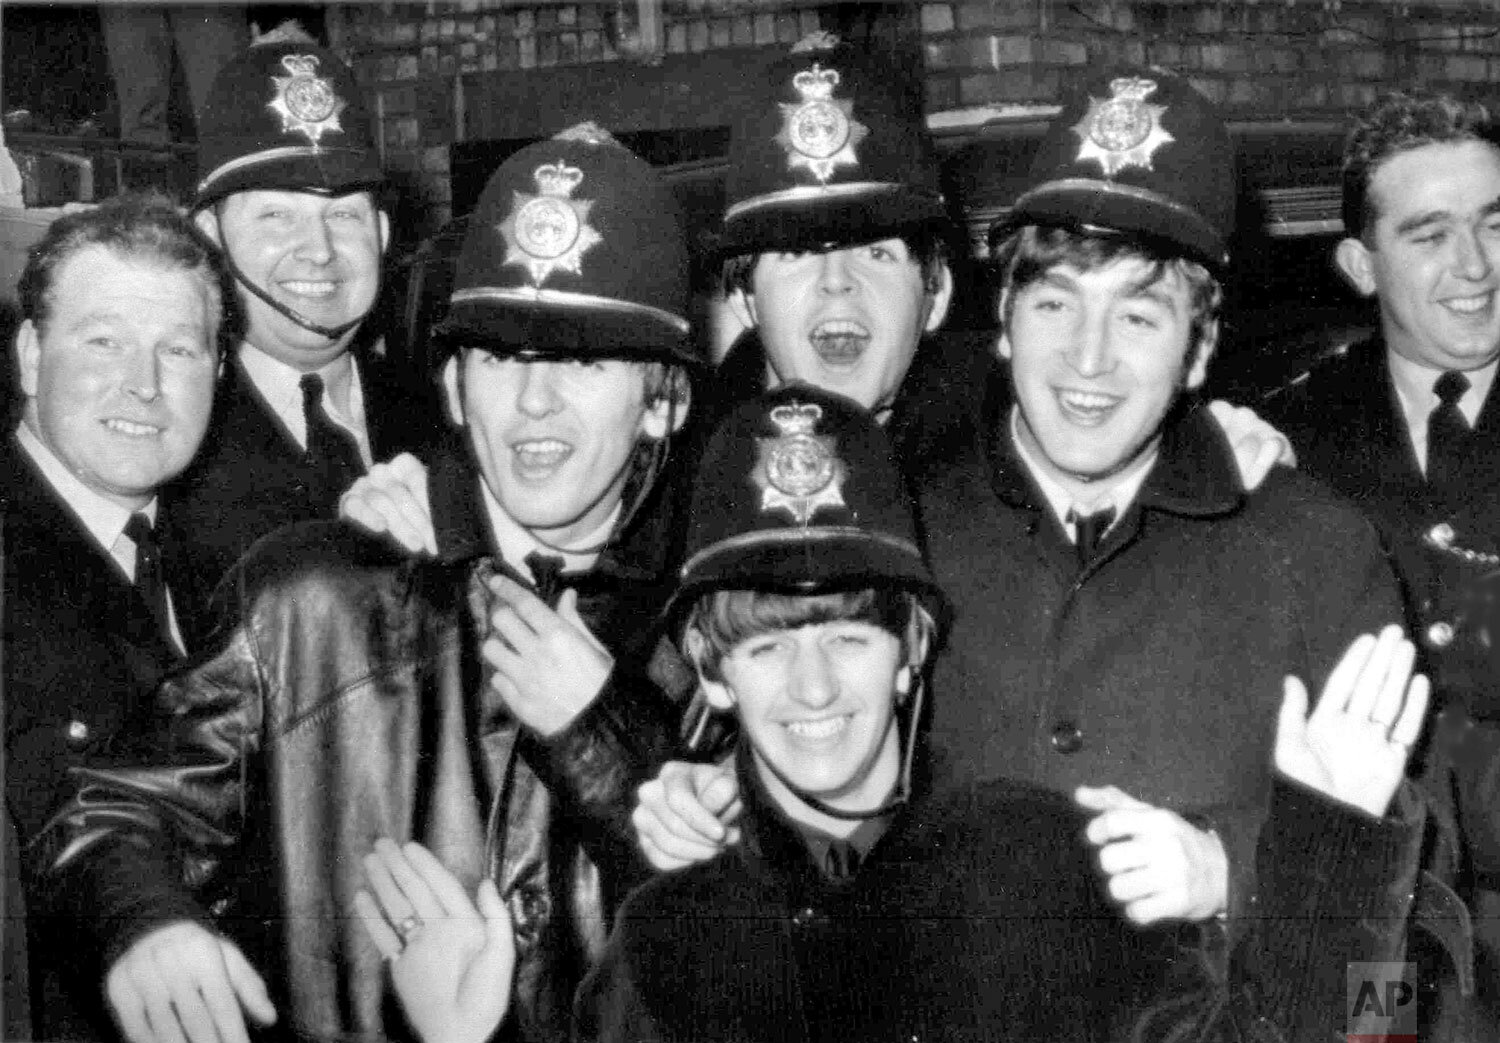  Britain's pop quartet The Beatles arrived almost unnoticed at the Hippodrome, Birmingham, Nov. 10, 1963, dressed as policemen. They are George Harrison, third left, Paul McCartney, John Lennon and Ringo Starr in front. Others in picture are real pol